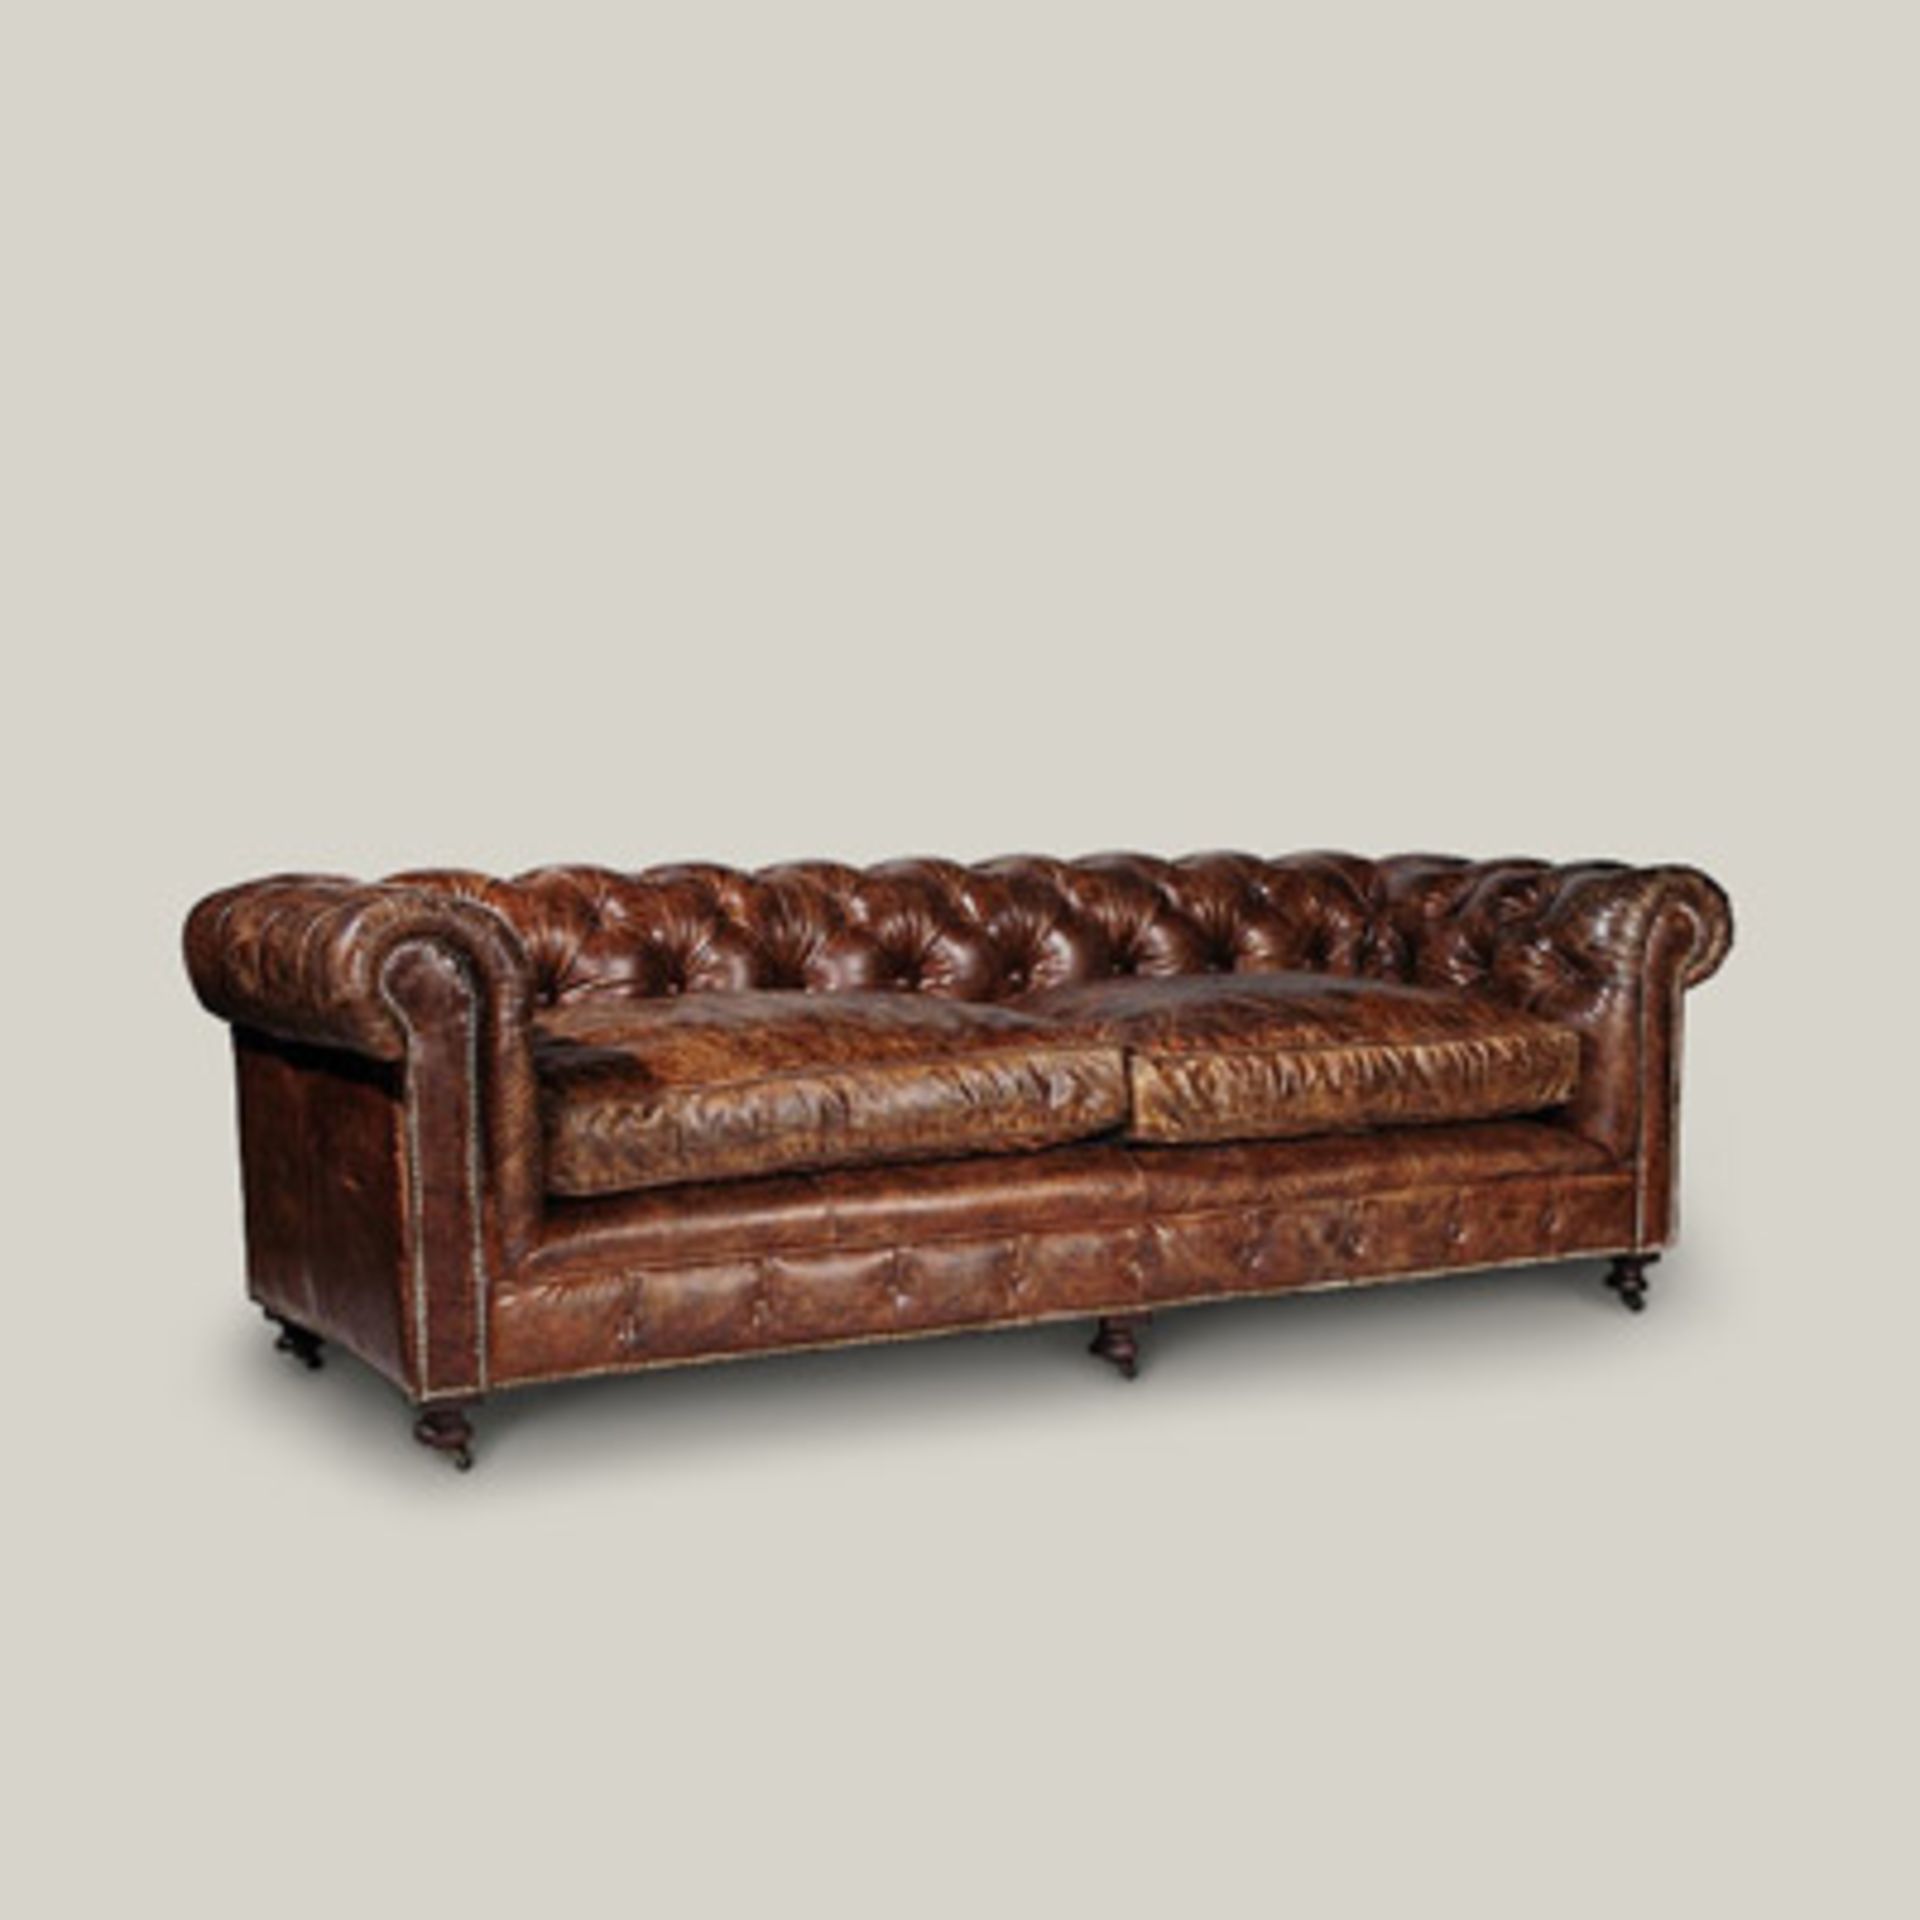 Kensington Sofa 3 Seater Well-Mannered Style Featuring The Natural Tones Of Timber And Leather And